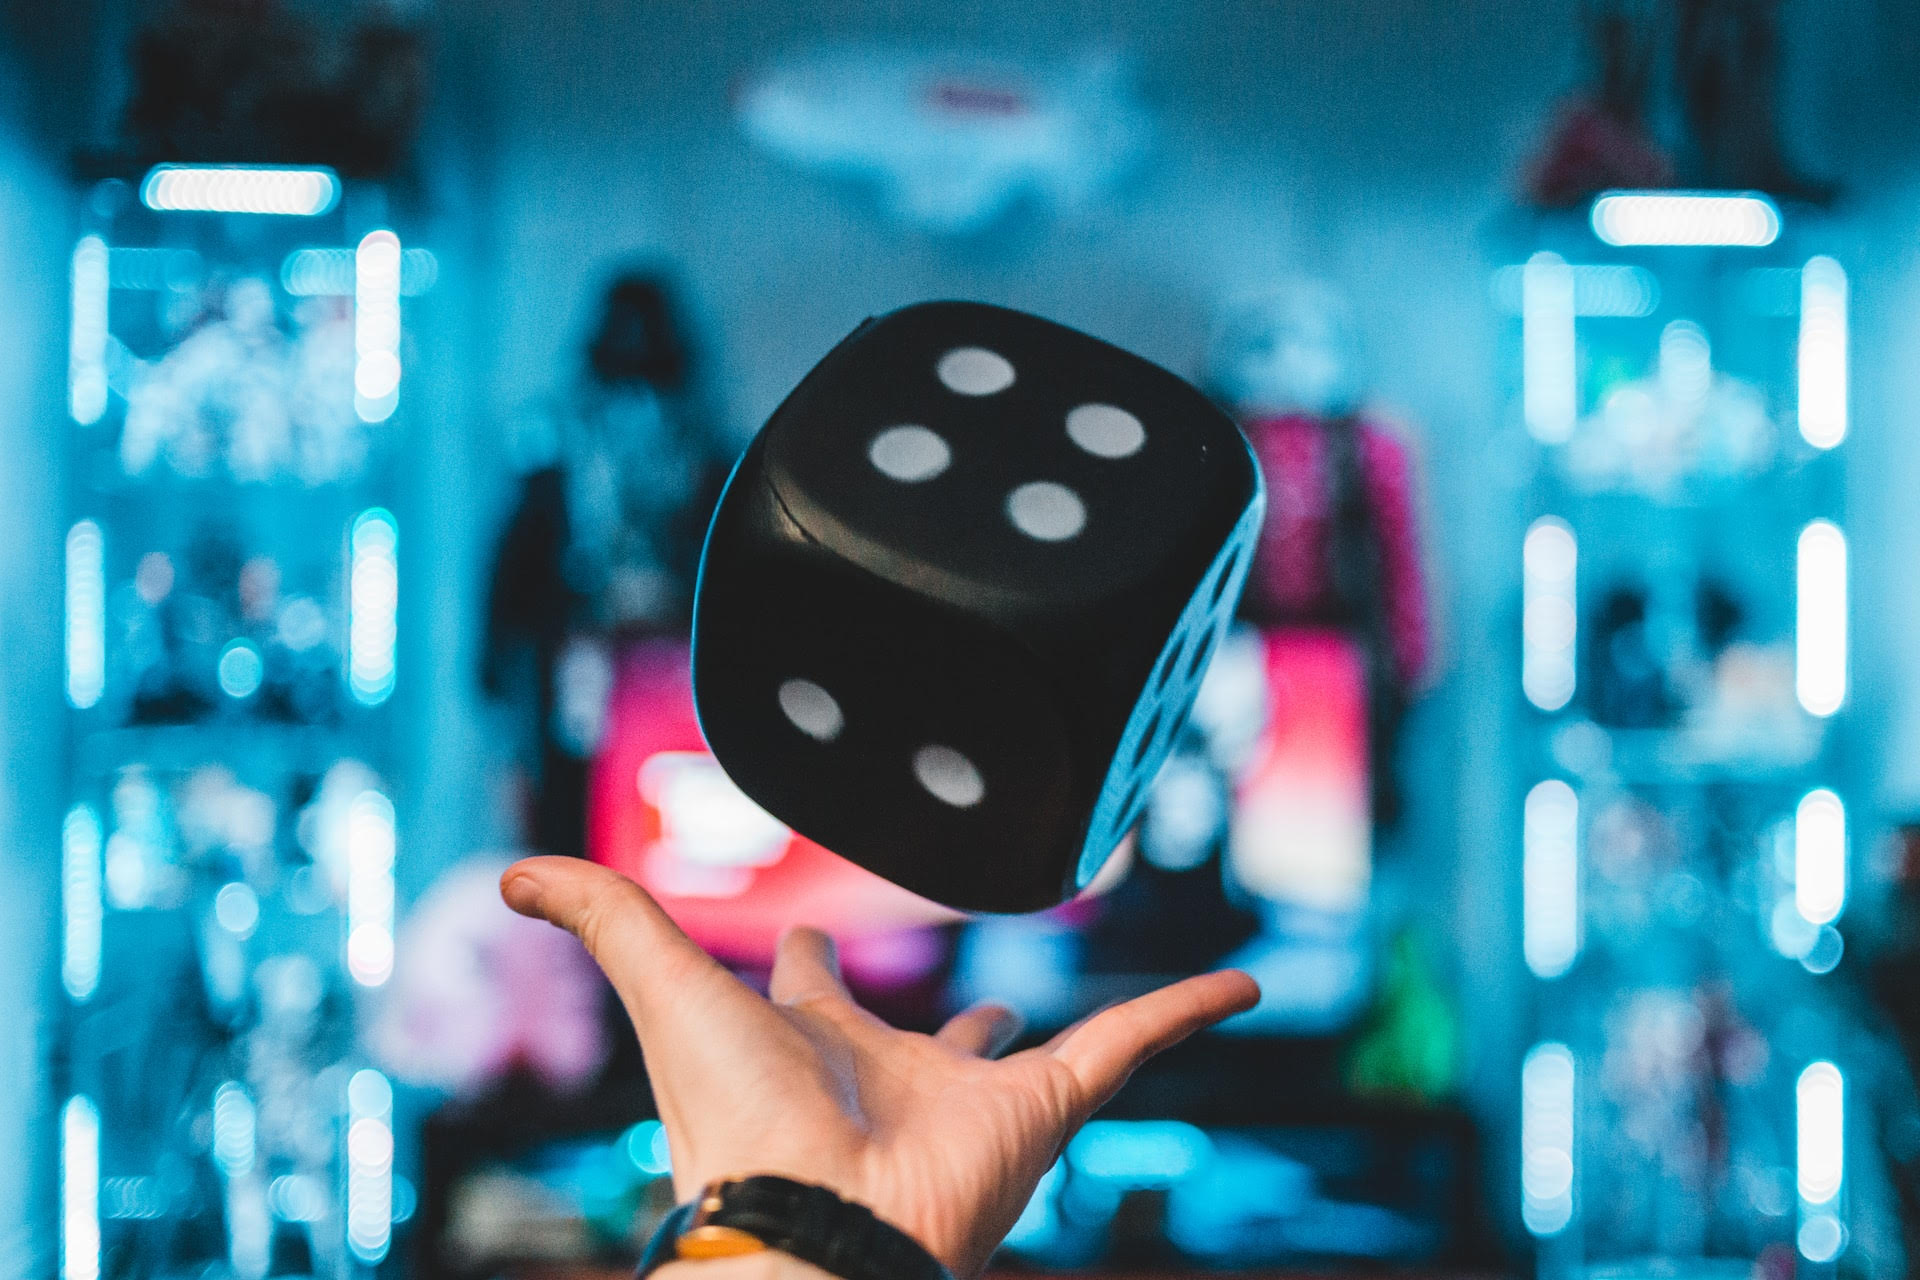 Step into BC Game's sports betting realm, where online casino meets cryptocurrency. Learn how online games and betting strategies revolutionize modern gaming experiences.